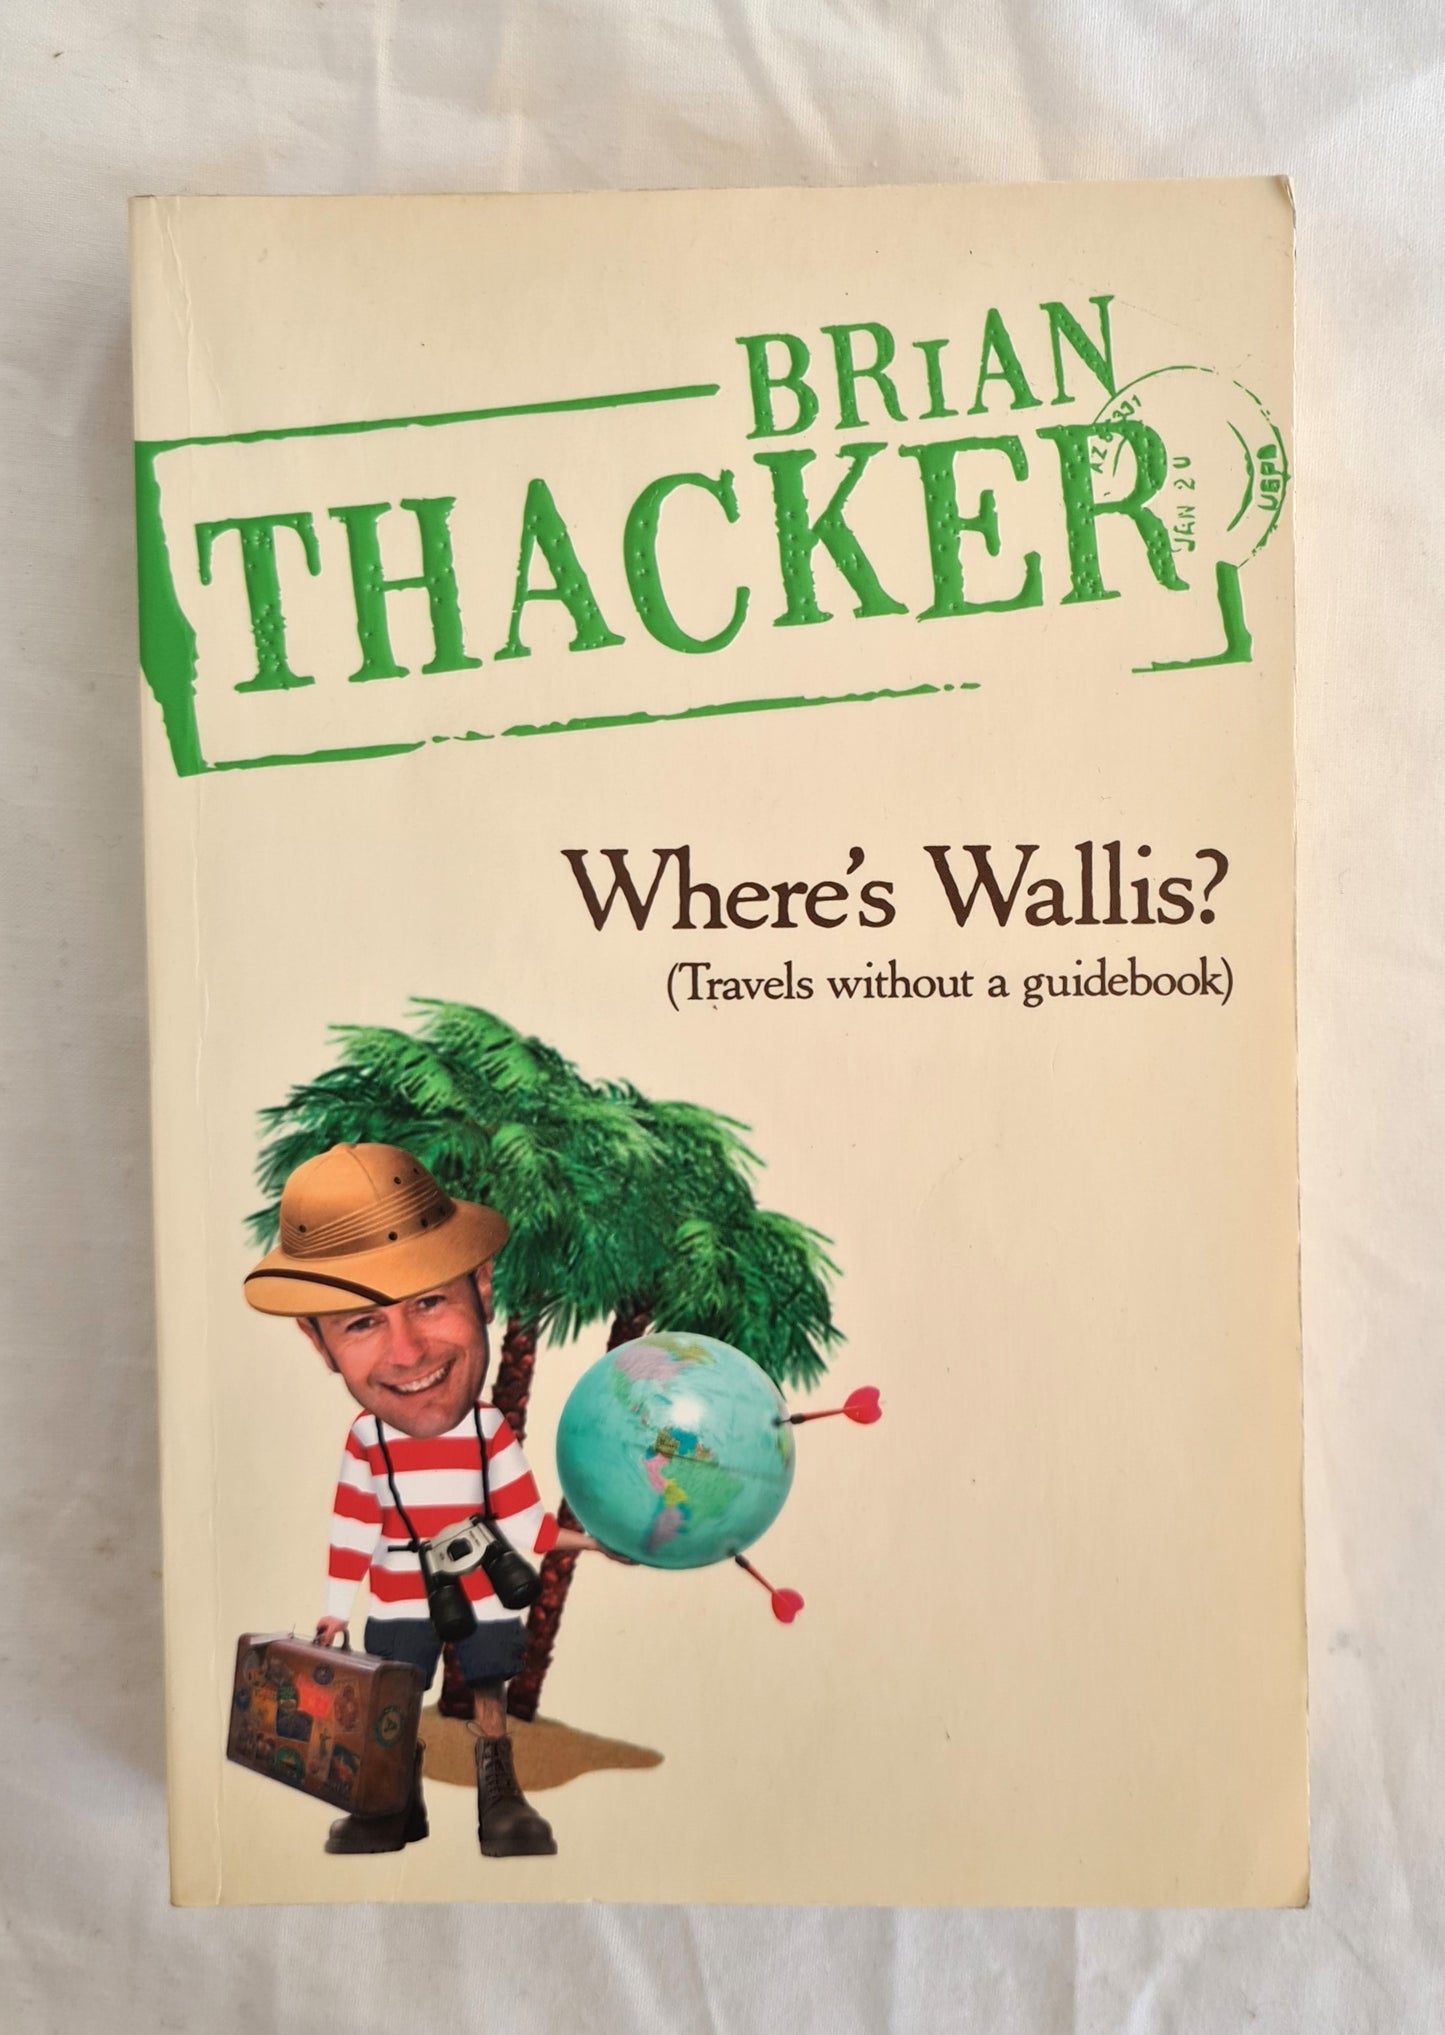 Where’s Wallis?  (Travels without a guidebook)  by Brian Thacker